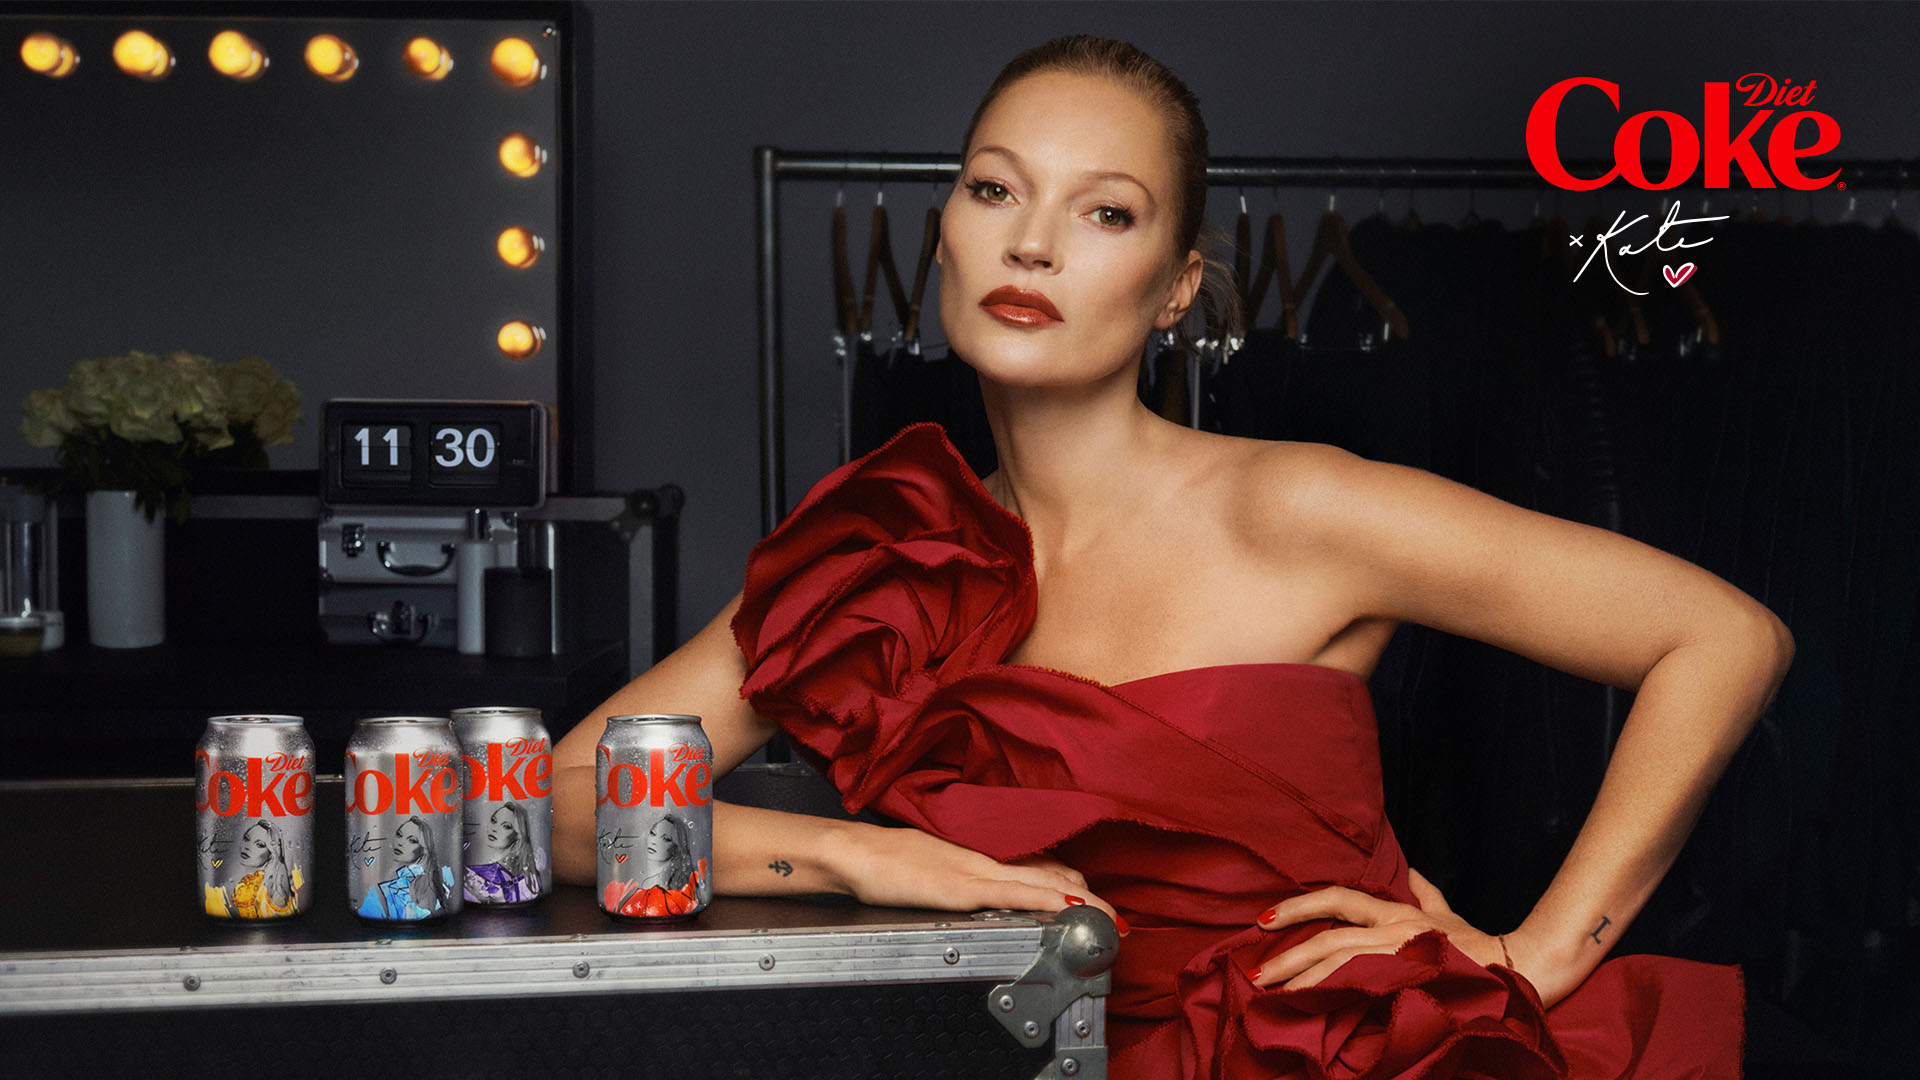 diet coke and kate moss limited edition cans